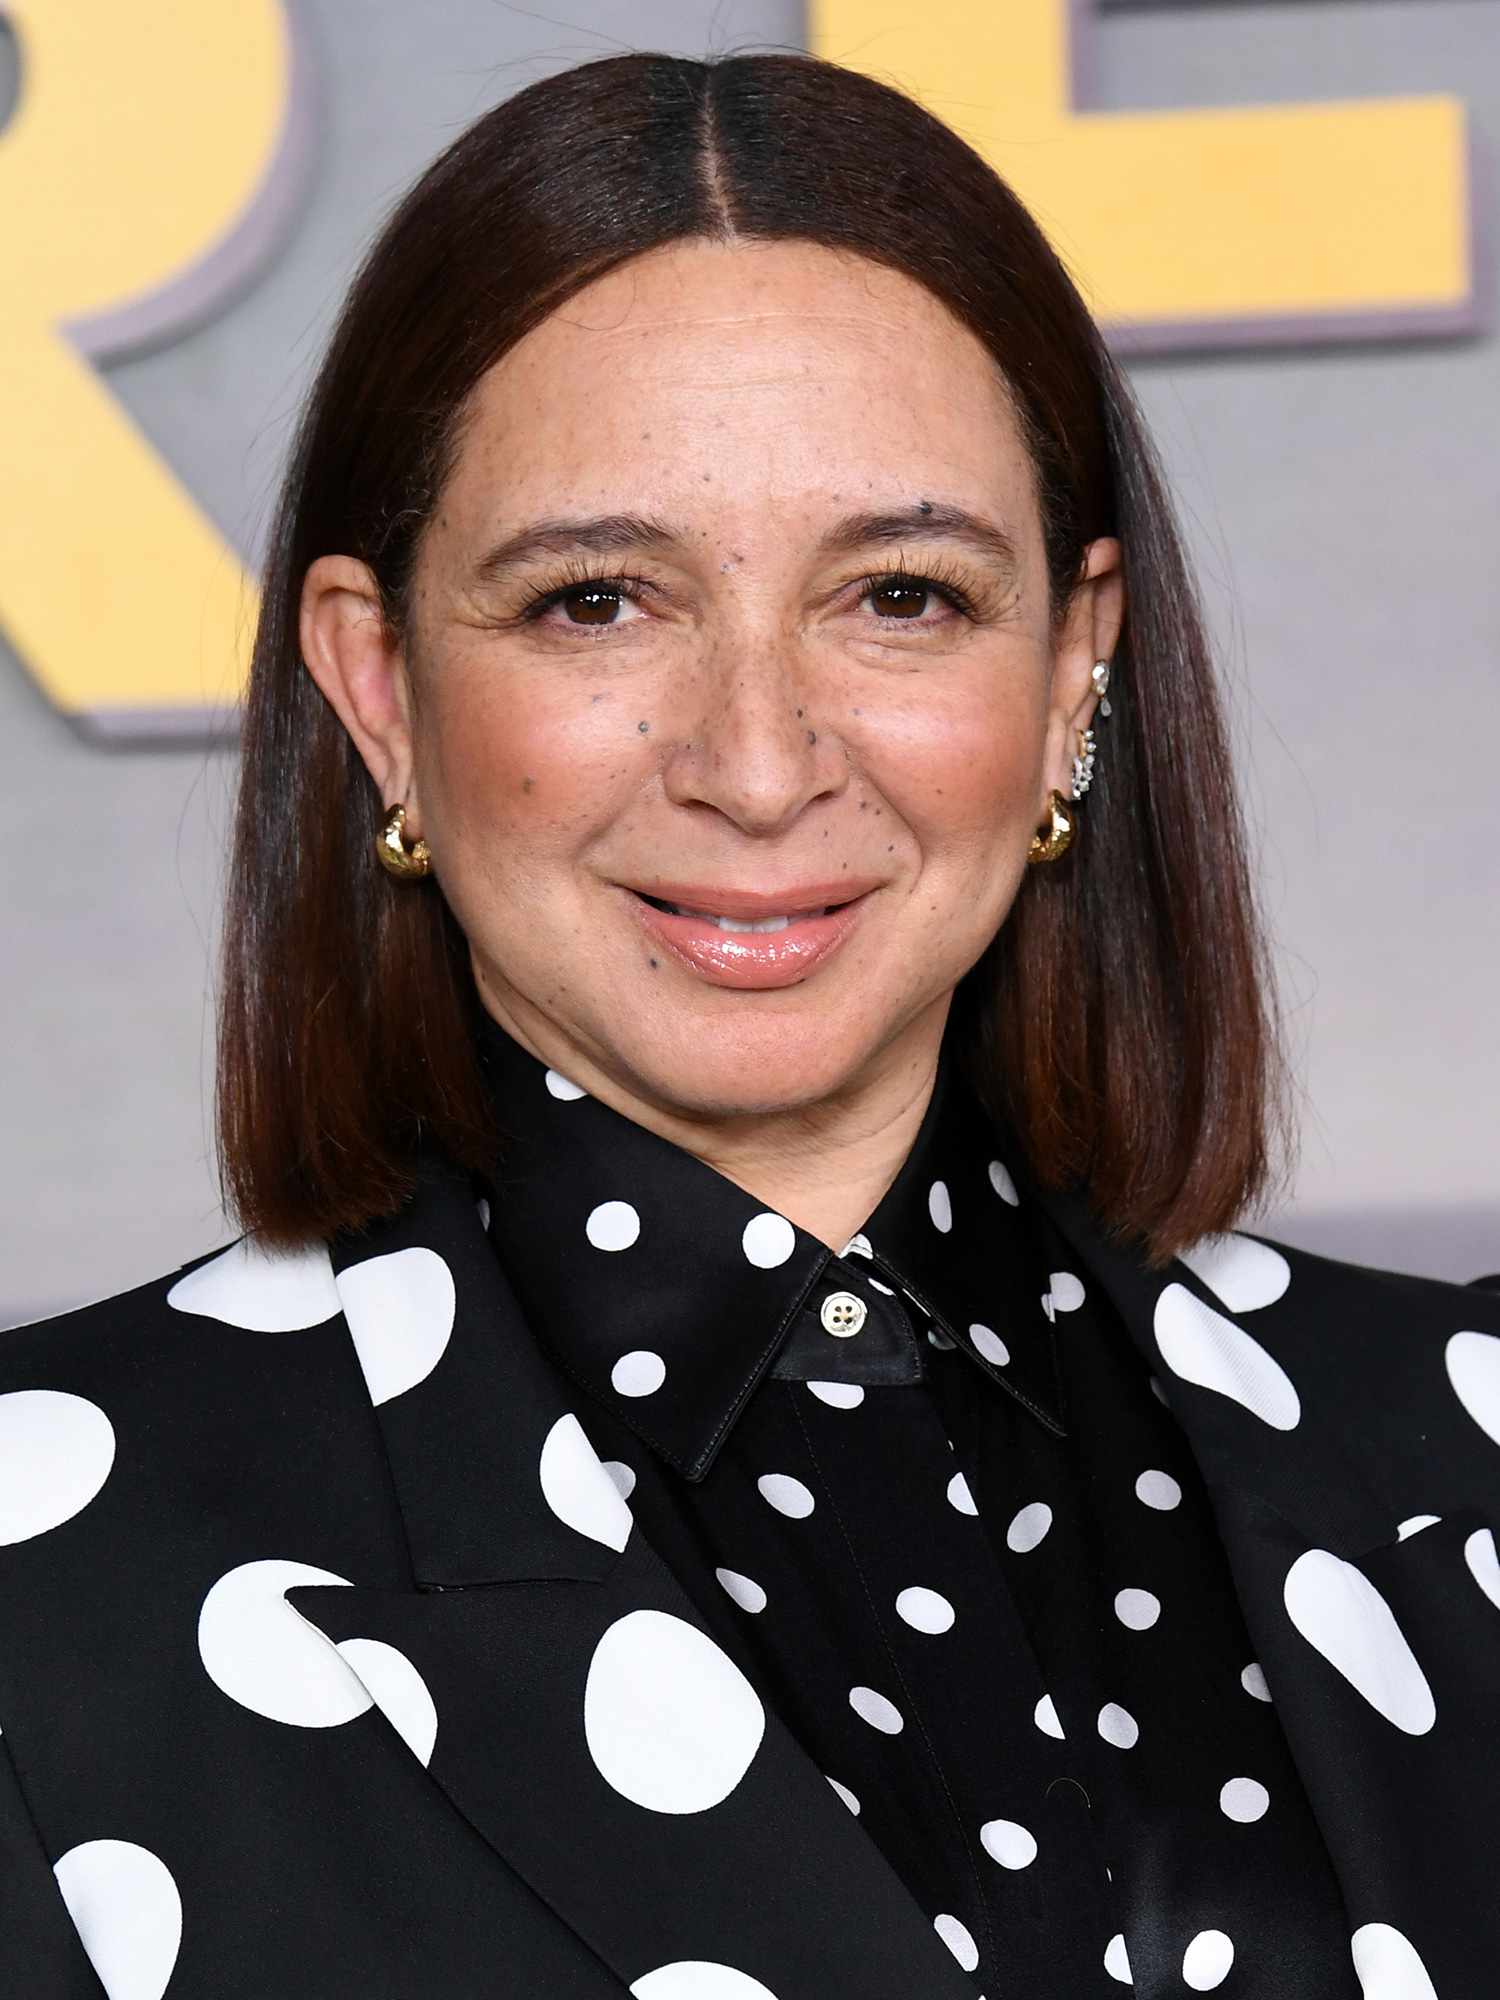 Maya Rudolph attends the Los Angeles premiere for the Peacock original series "Poker Face" 